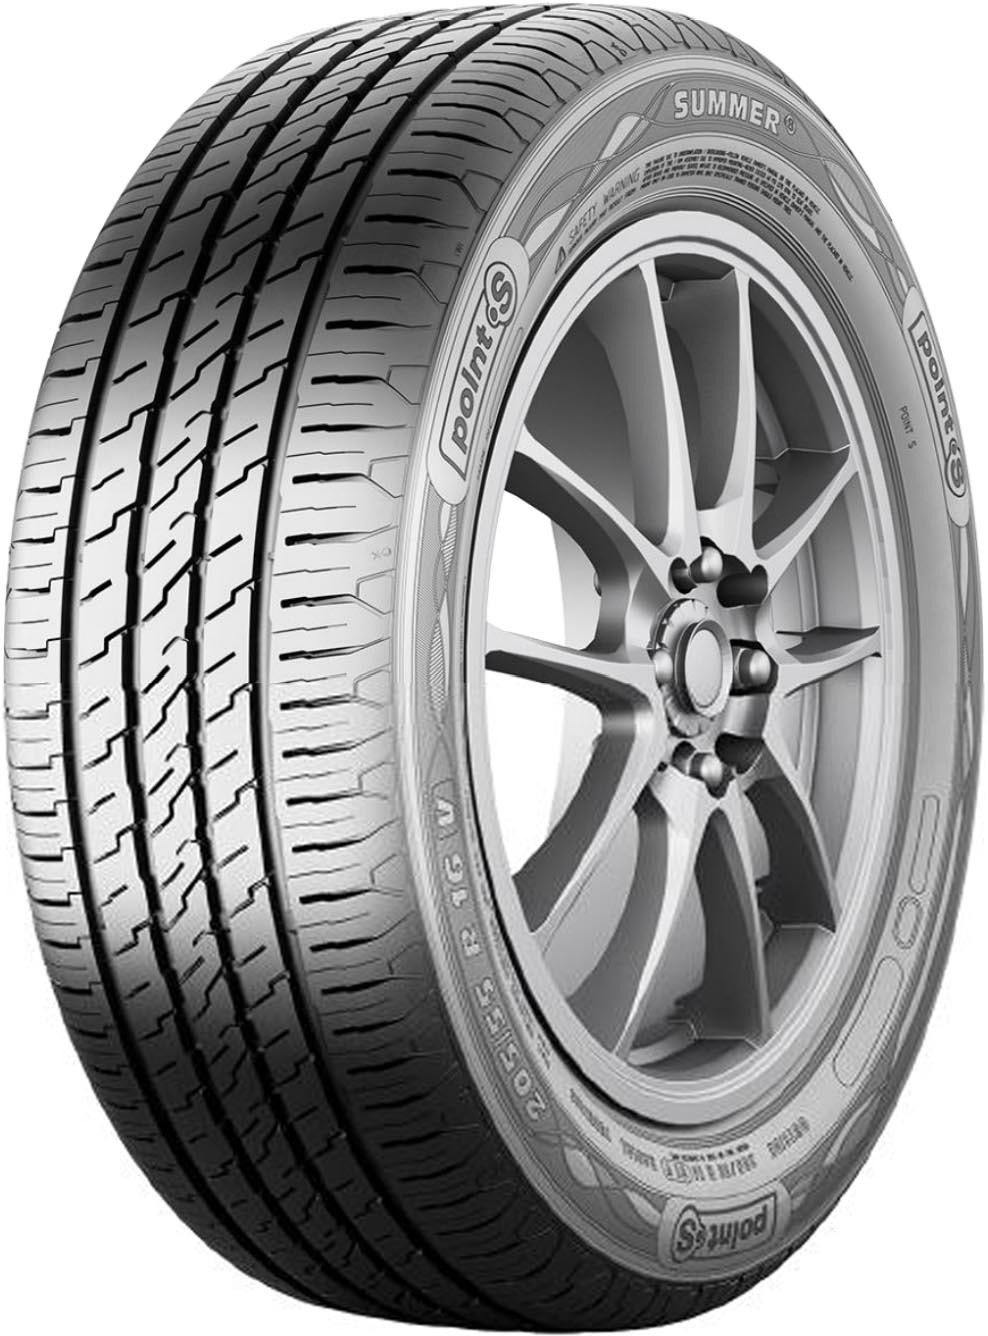 POINTS SUMMER S 225/45R17 91Y